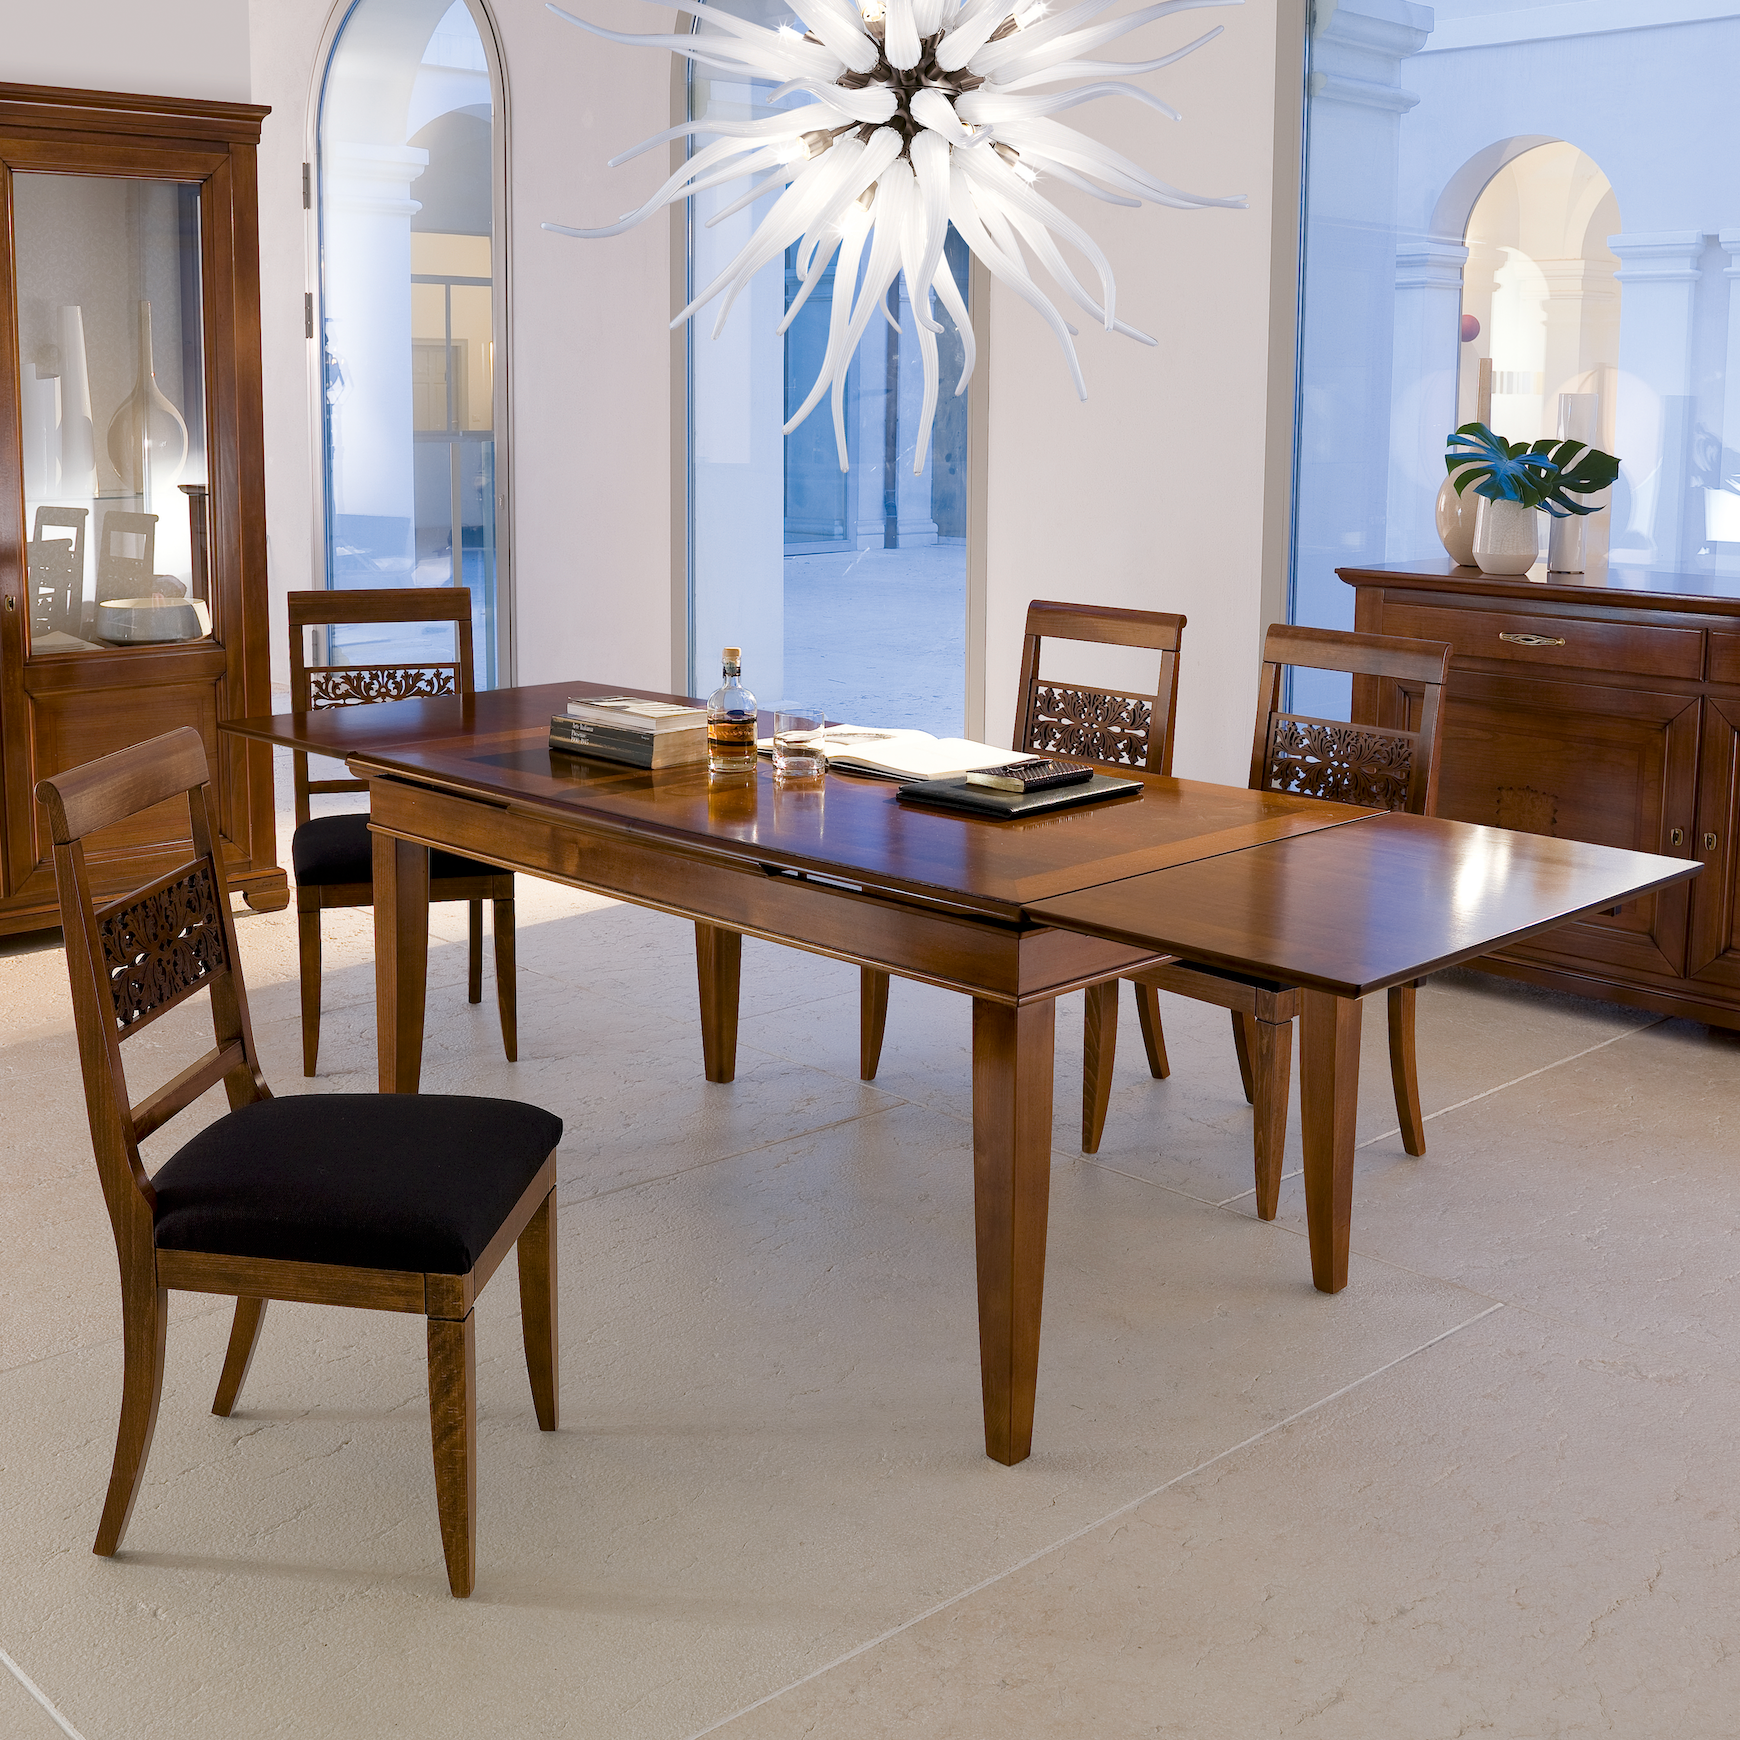 Classic Extendable Rectangular Table L 180 with 6 Classic Chairs in Cherry Wood and Genuine Leather Arte Piombini Collection